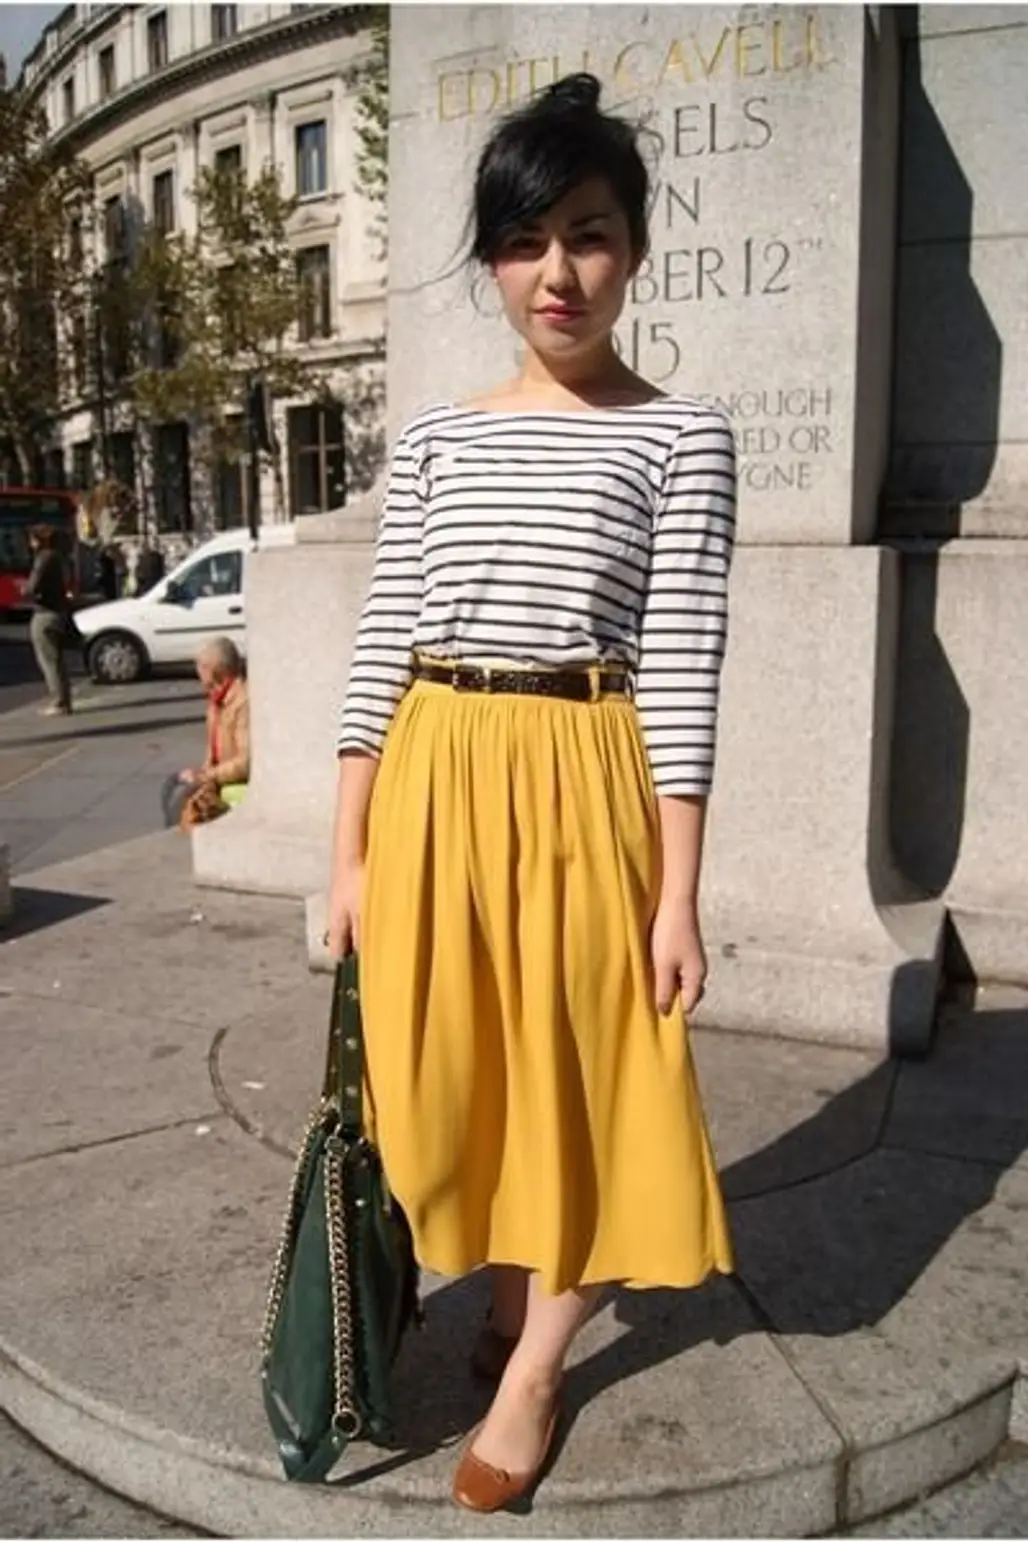 Myth Debunked: Flats Look Just as Cute when Worn with a Longer Skirt